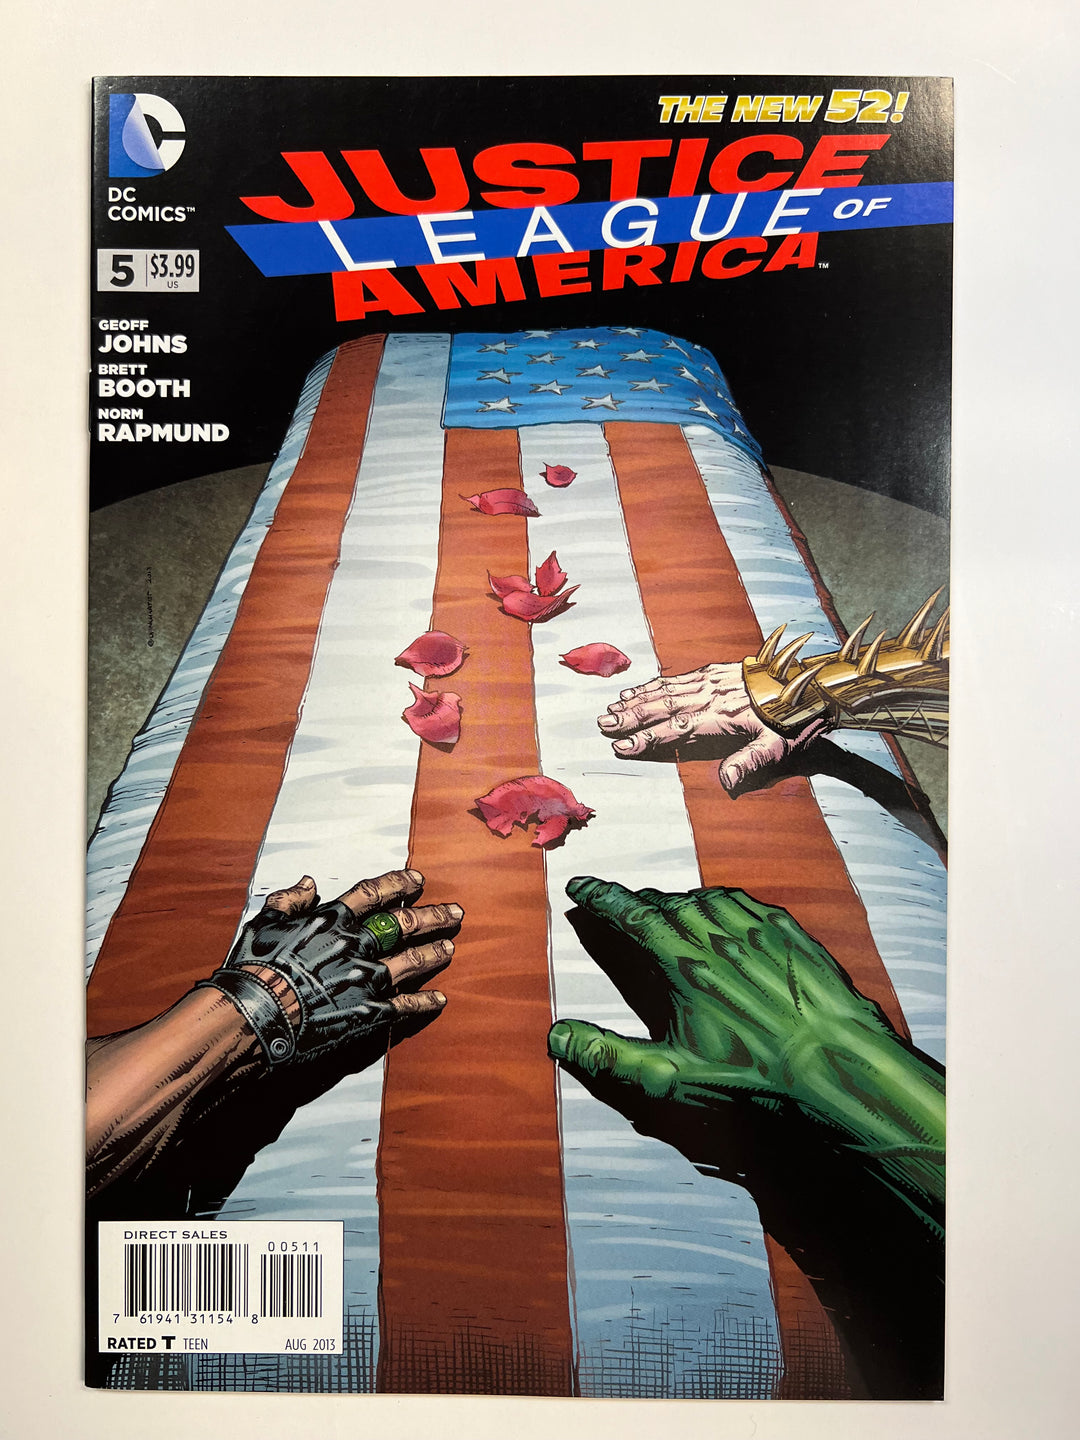 Justice League of America #5 DC 2013 VF+